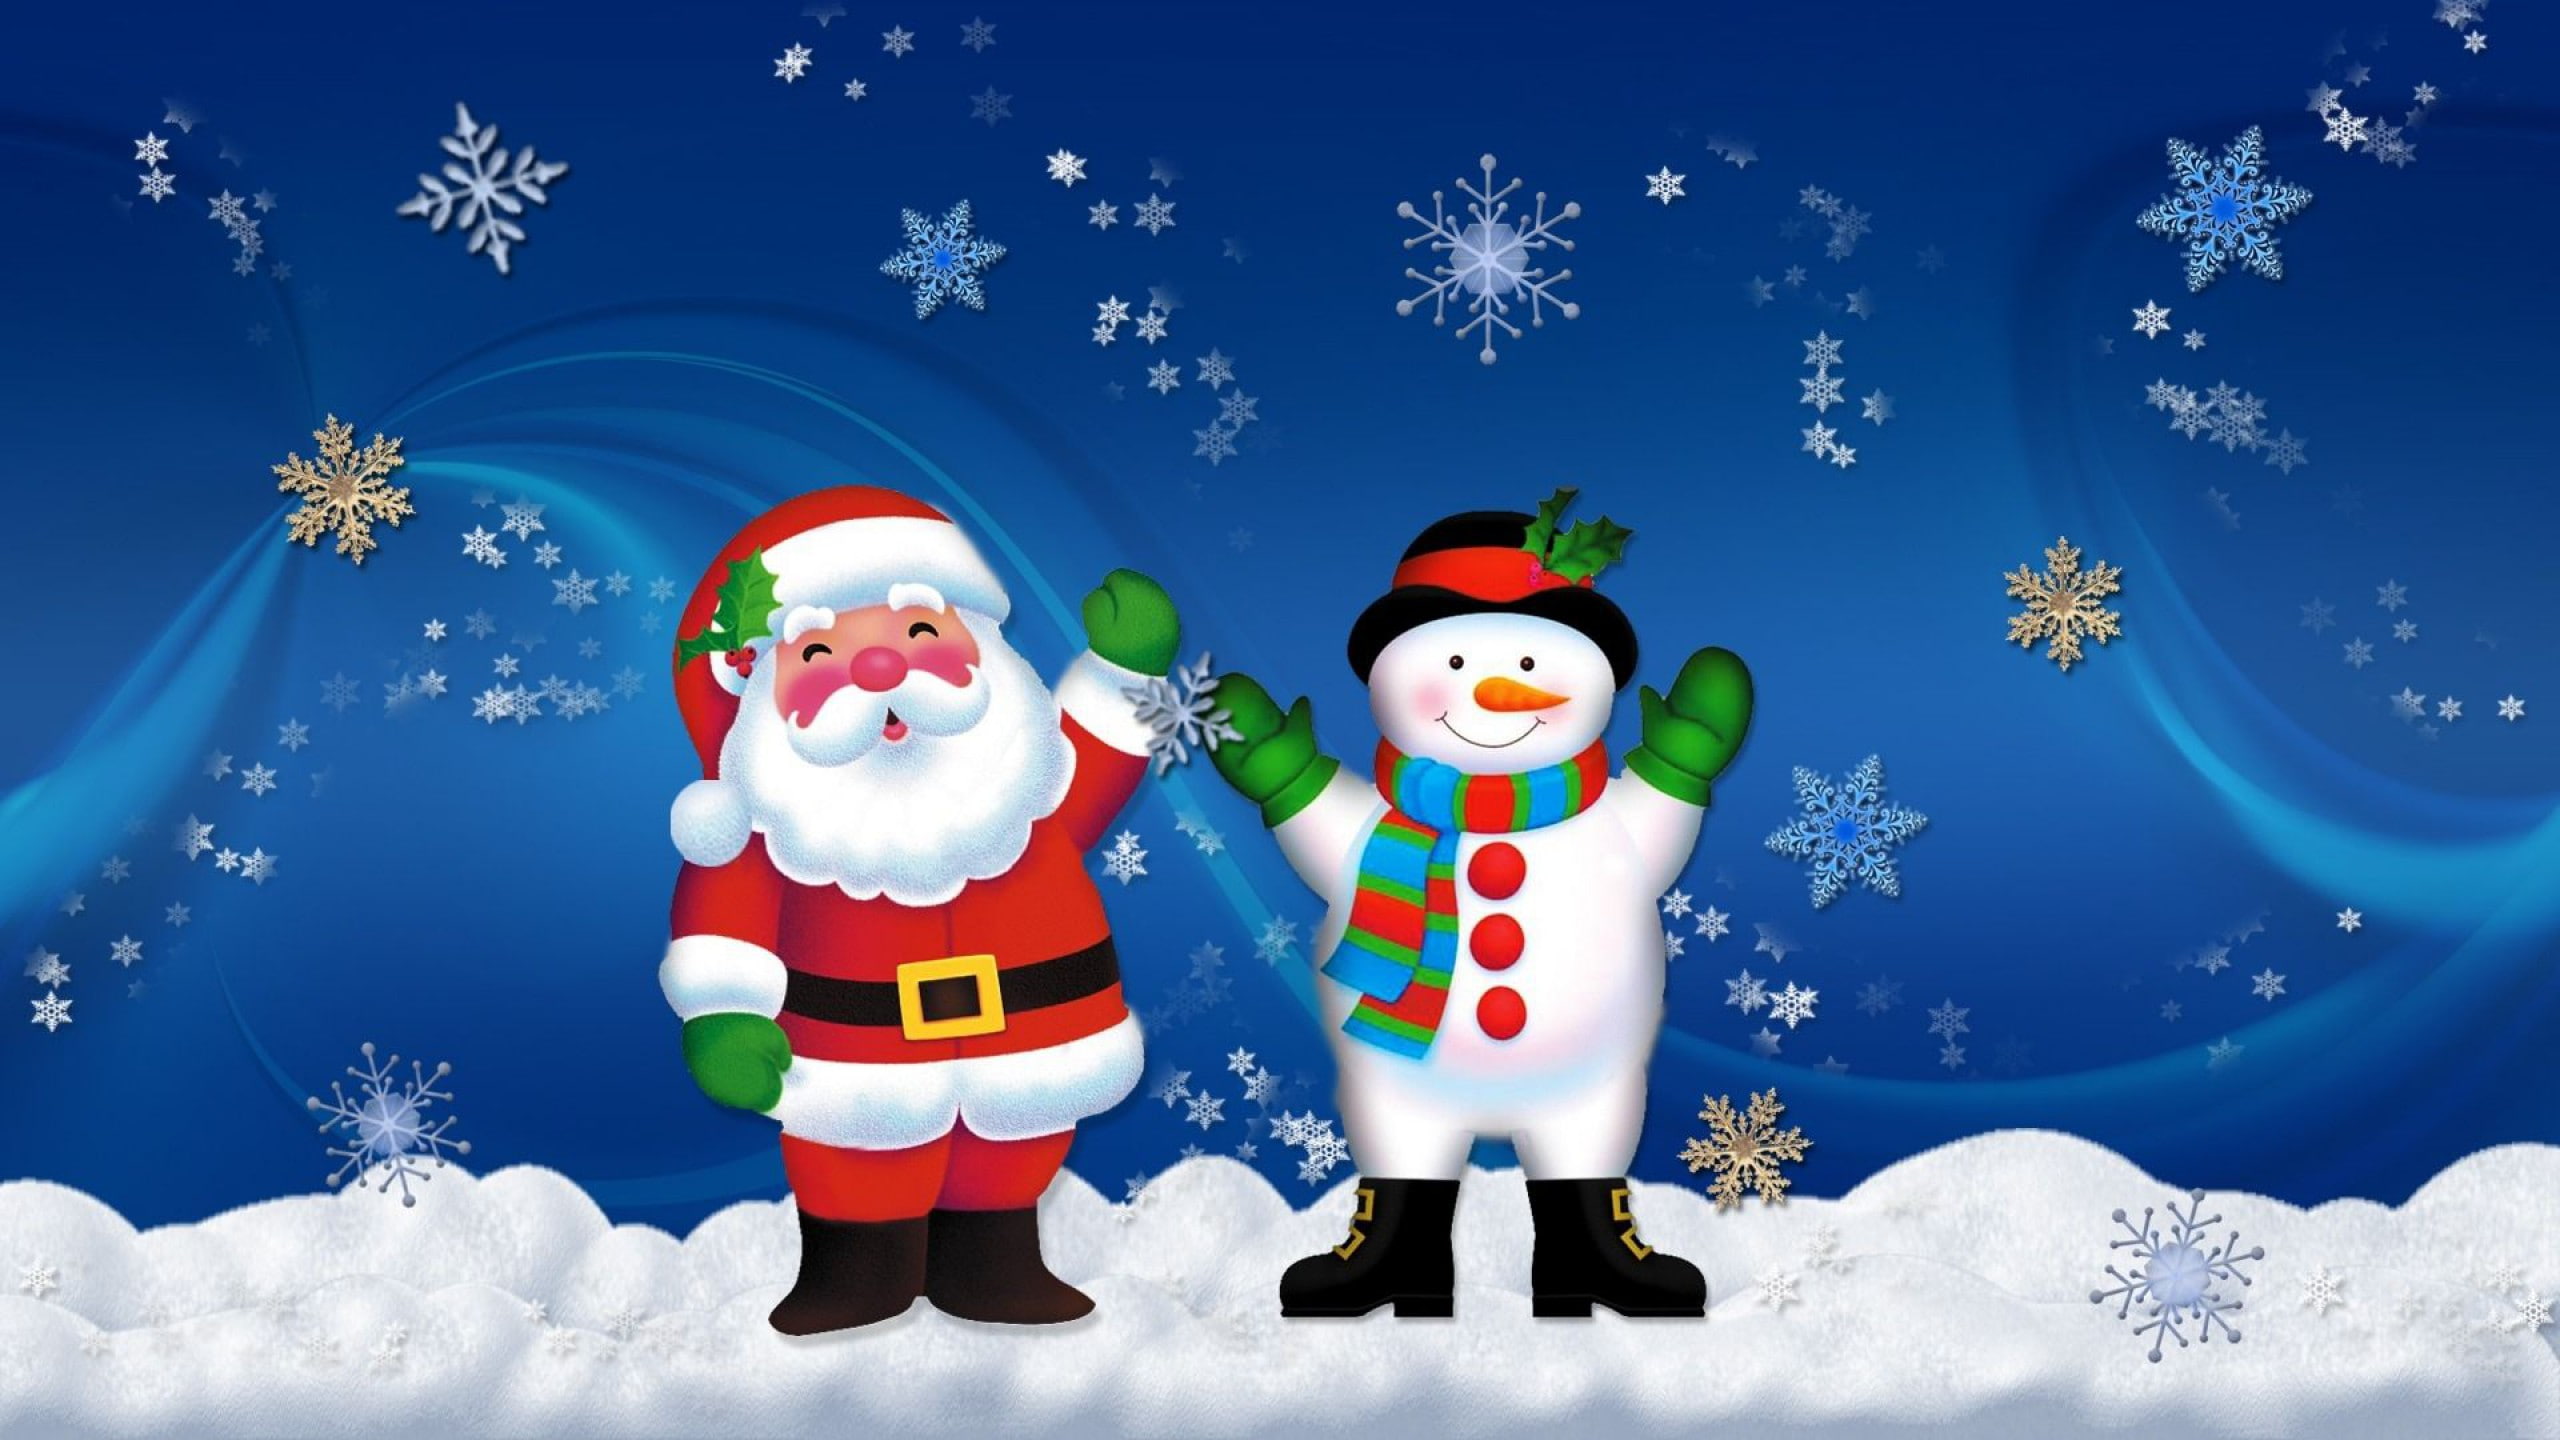 Merry Christmas Santa Claus And Snowman Old Friends Hd Wallpapers 2560×1440